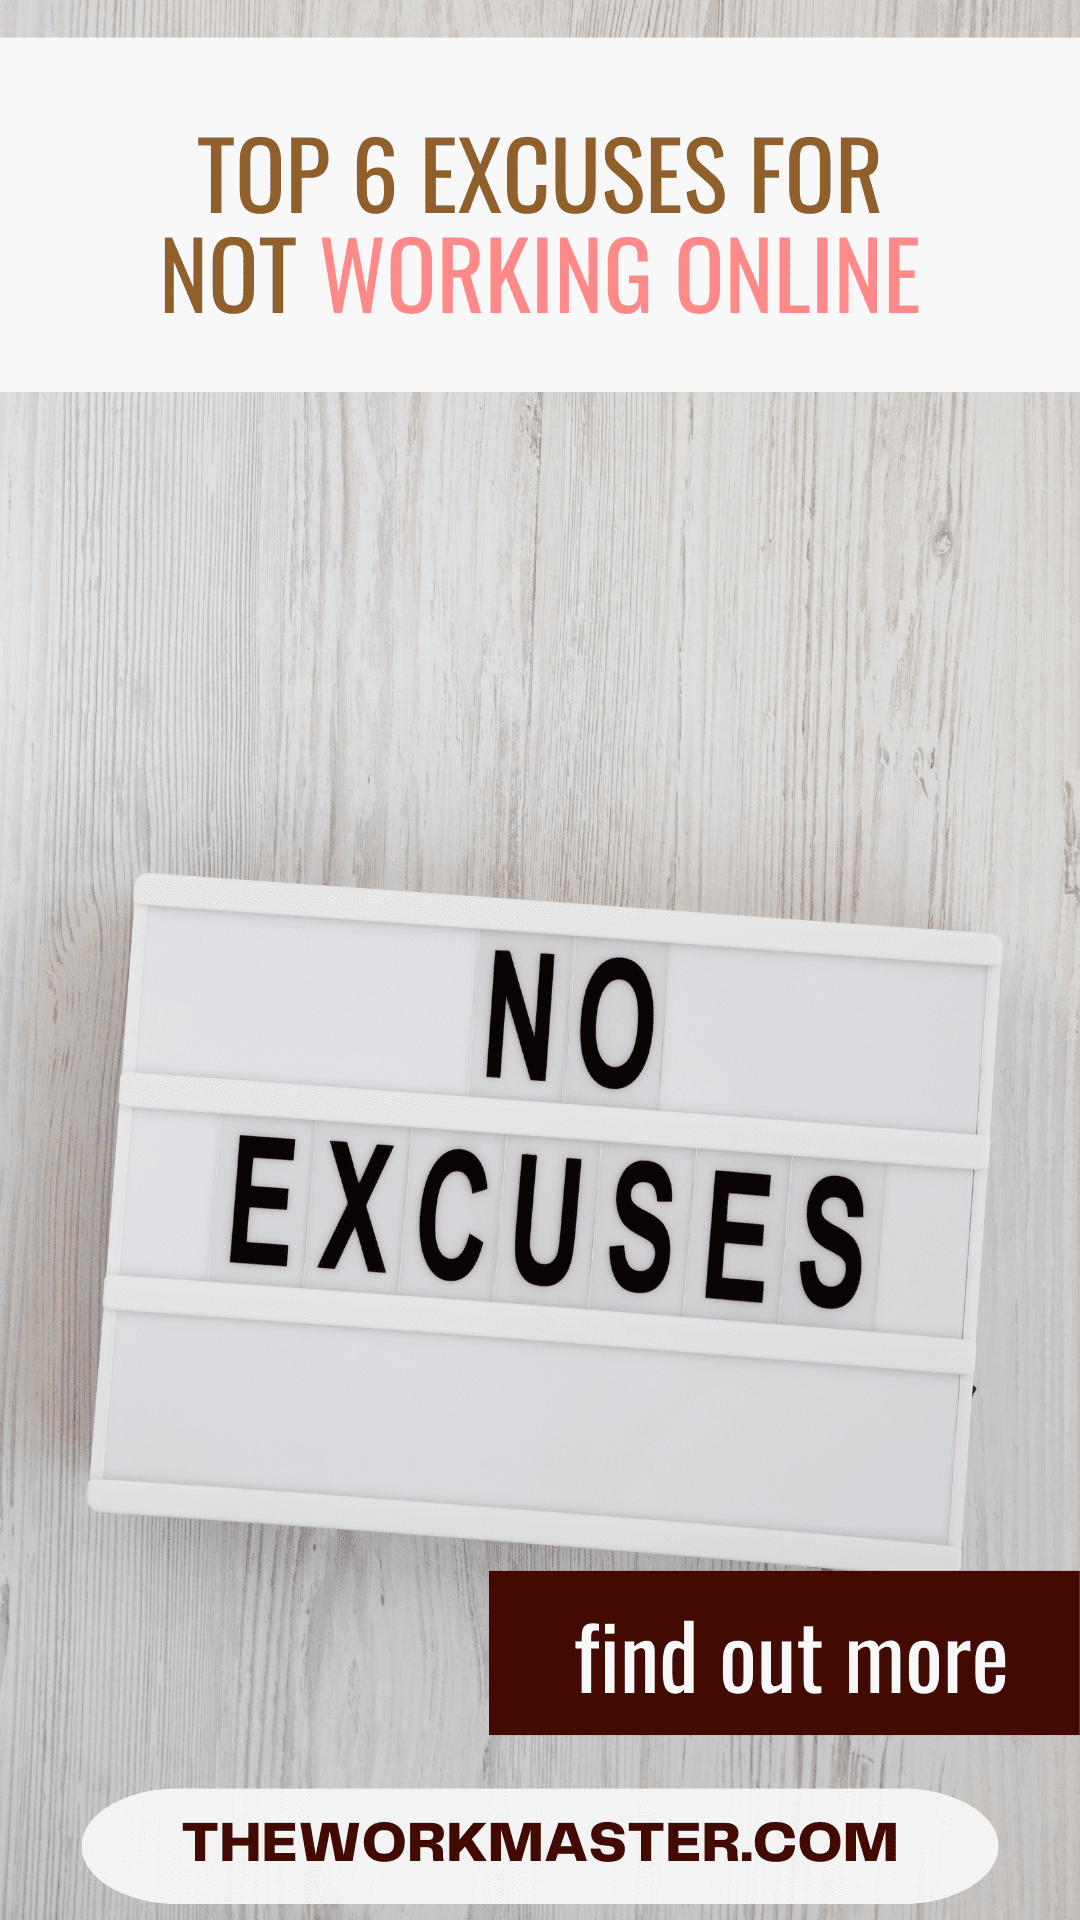 A sign with the text "No Excuses" and the text "Top 6 excuses for not working remotely"